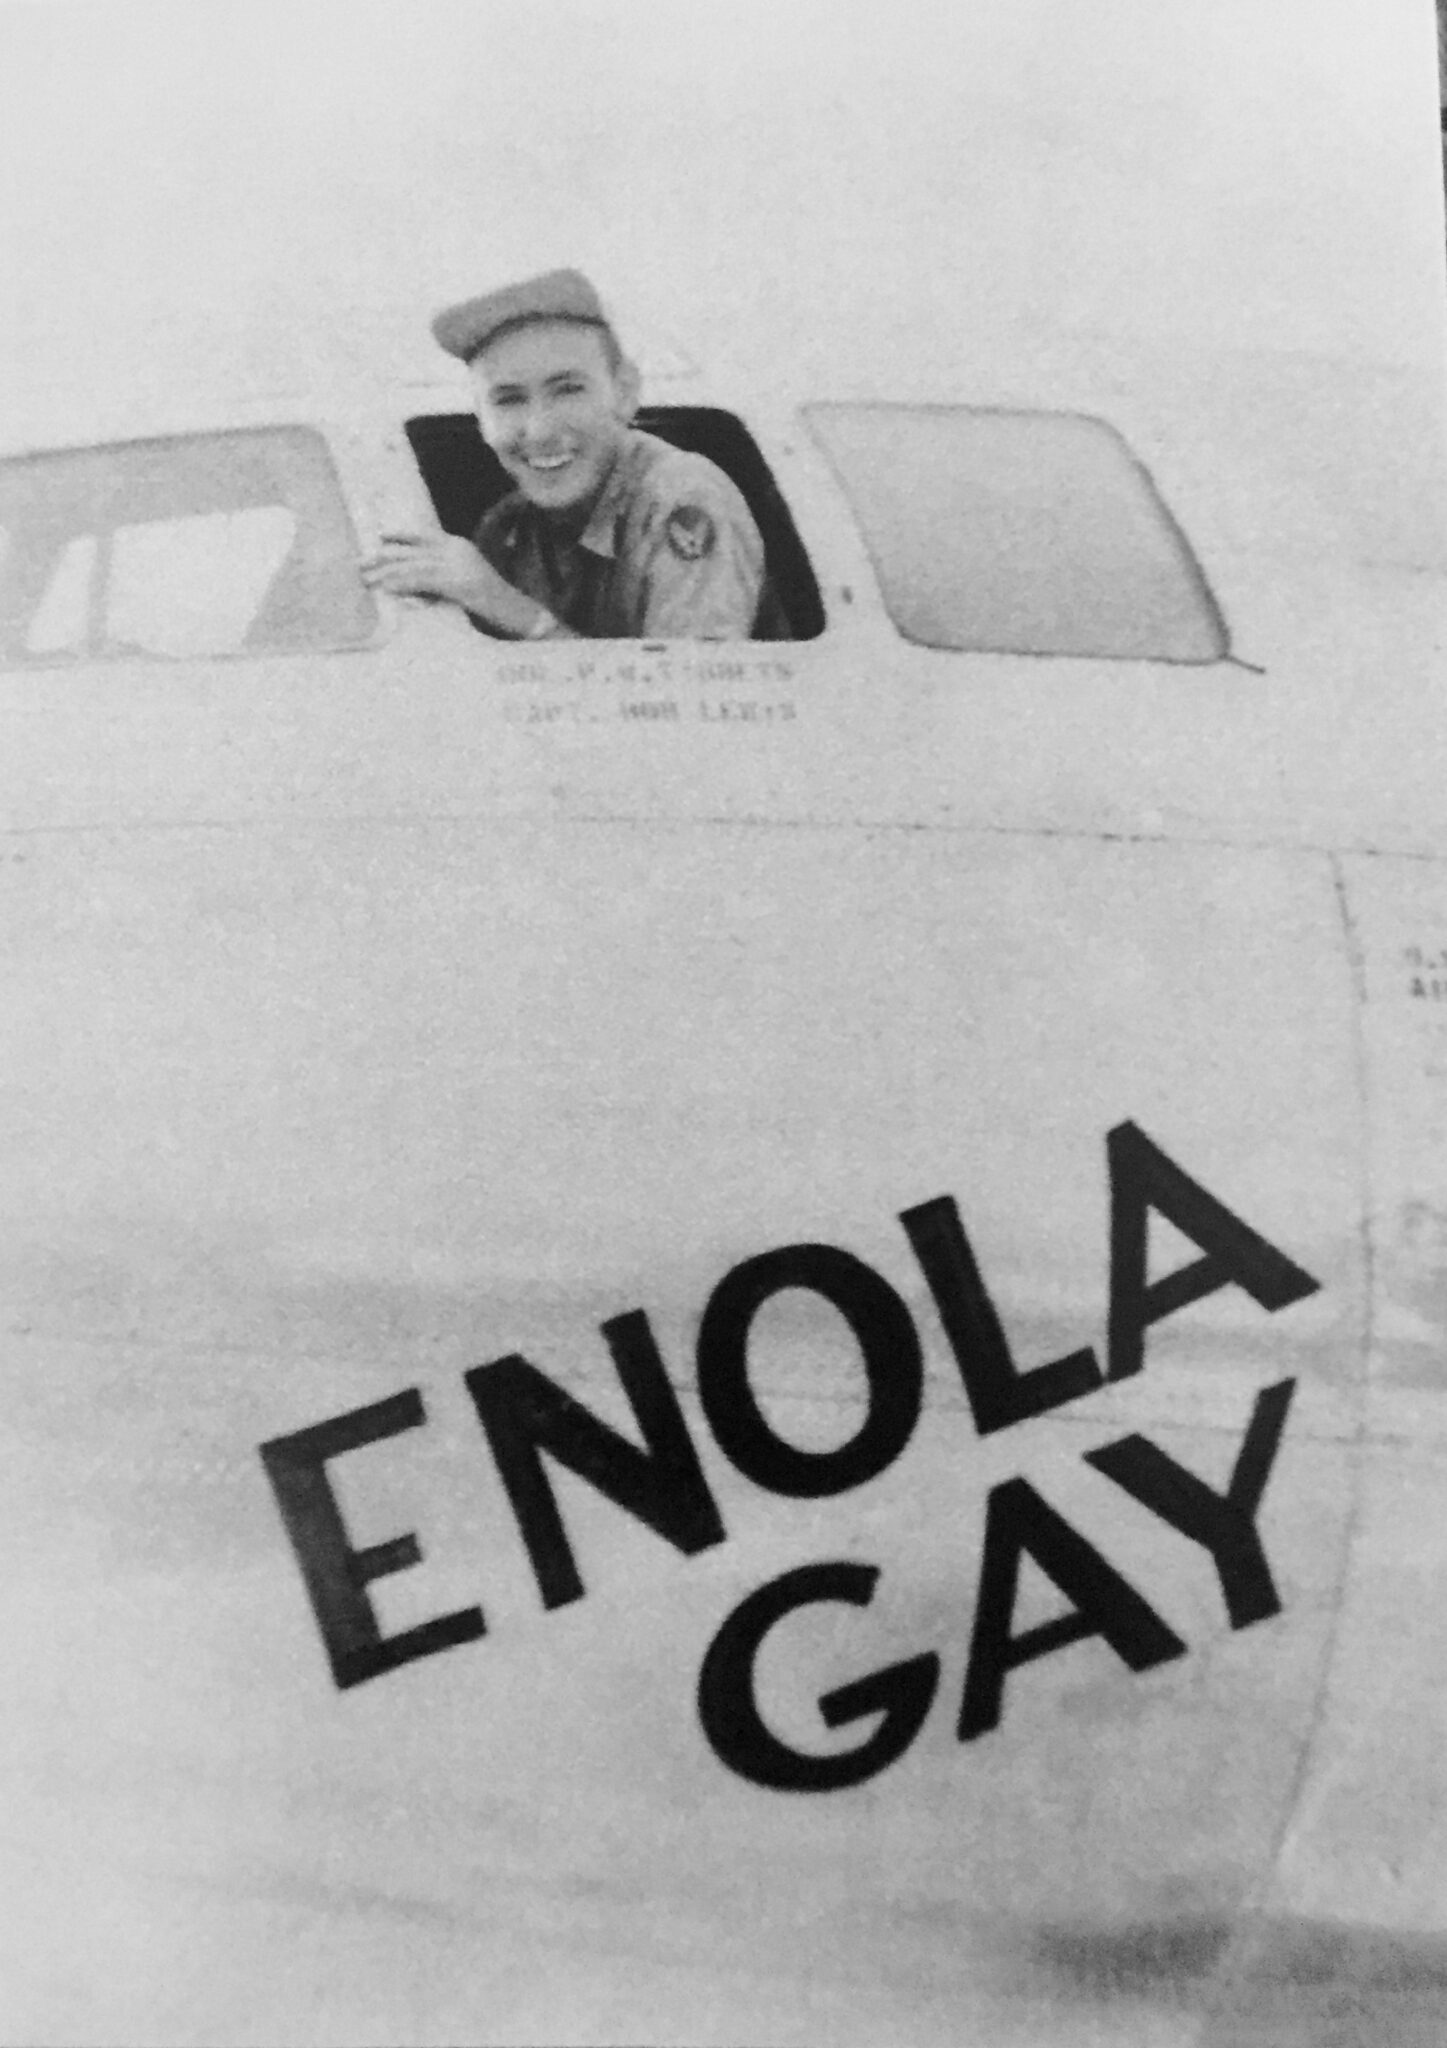 fate of the crew of the enola gay